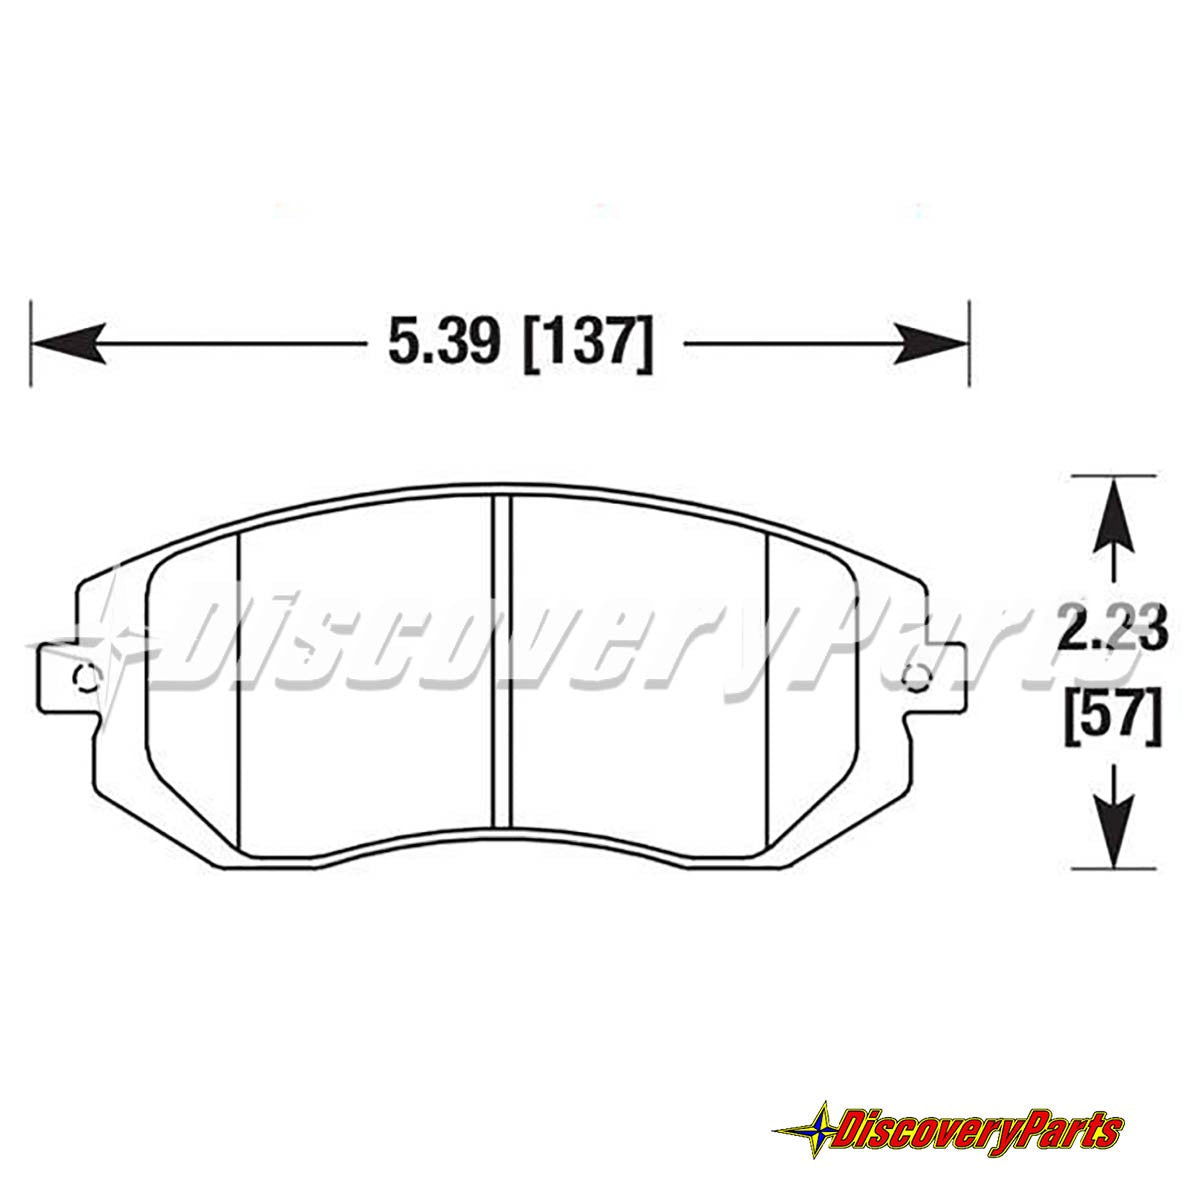 Carbotech FRS-BRZ-GT86 w- Brembo Package Front Brake Pad Set CT929